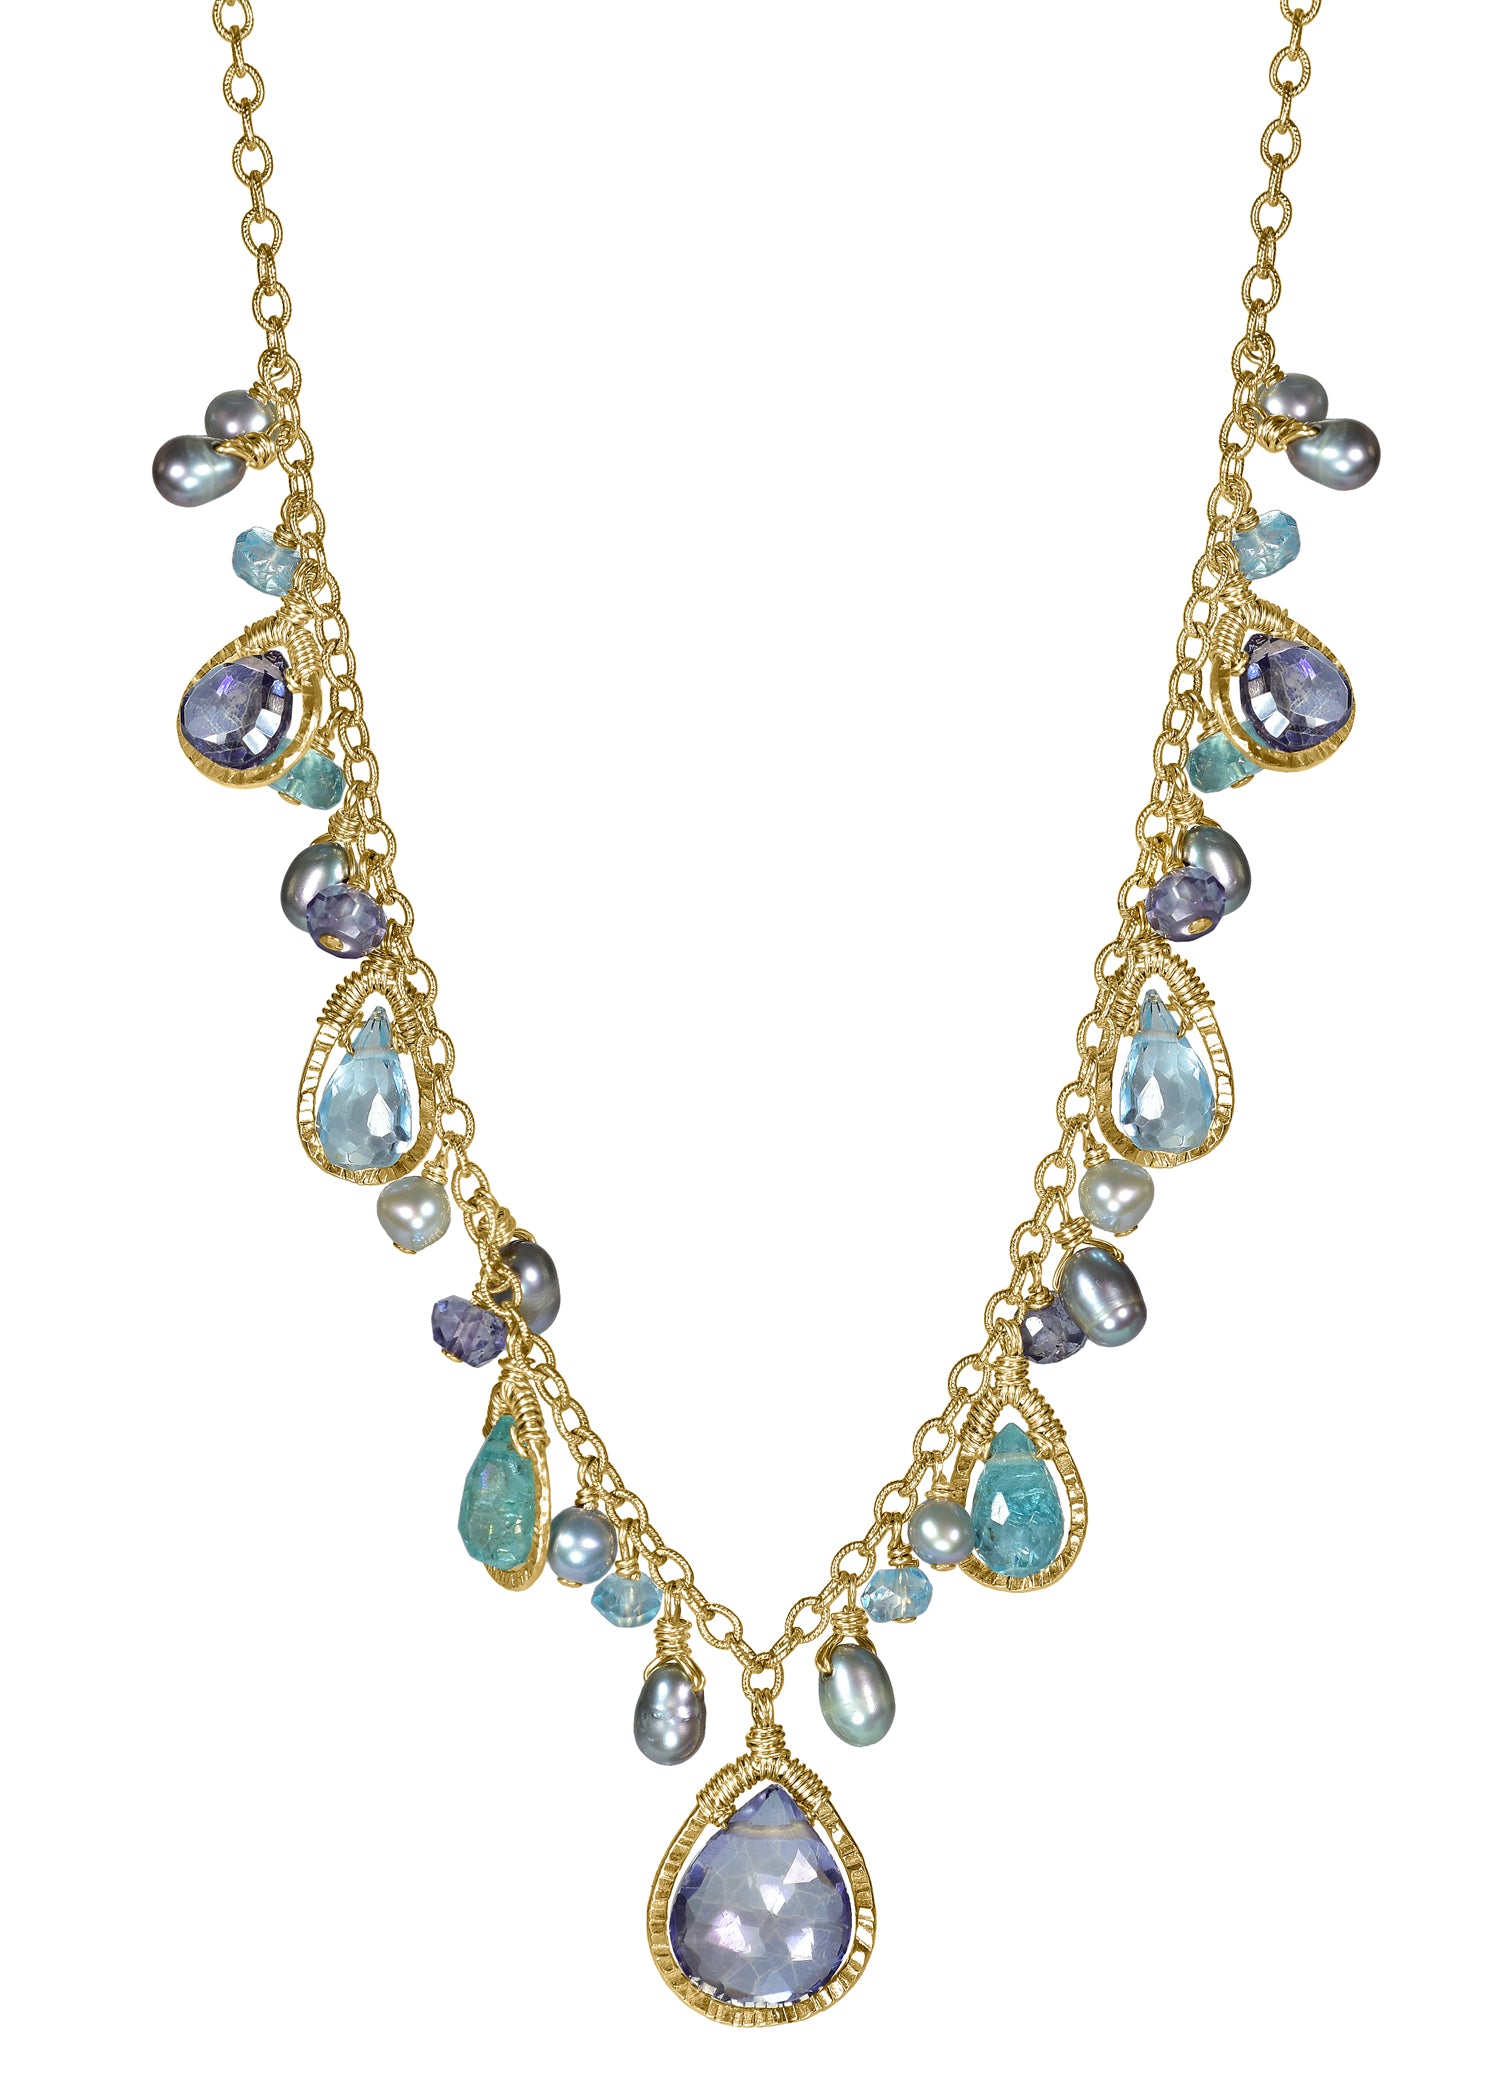 Blue quartz Apatite Blue topaz Lolite Freshwater pearl 14k gold fill Necklace measures 17" in length Pendants measure 5/16" in length and 1/4" in width (x2), 3/8" in length and 1/4" in width (x4), 1/2" in length and 3/8" in width (x1) Handmade in our Los Angeles studio